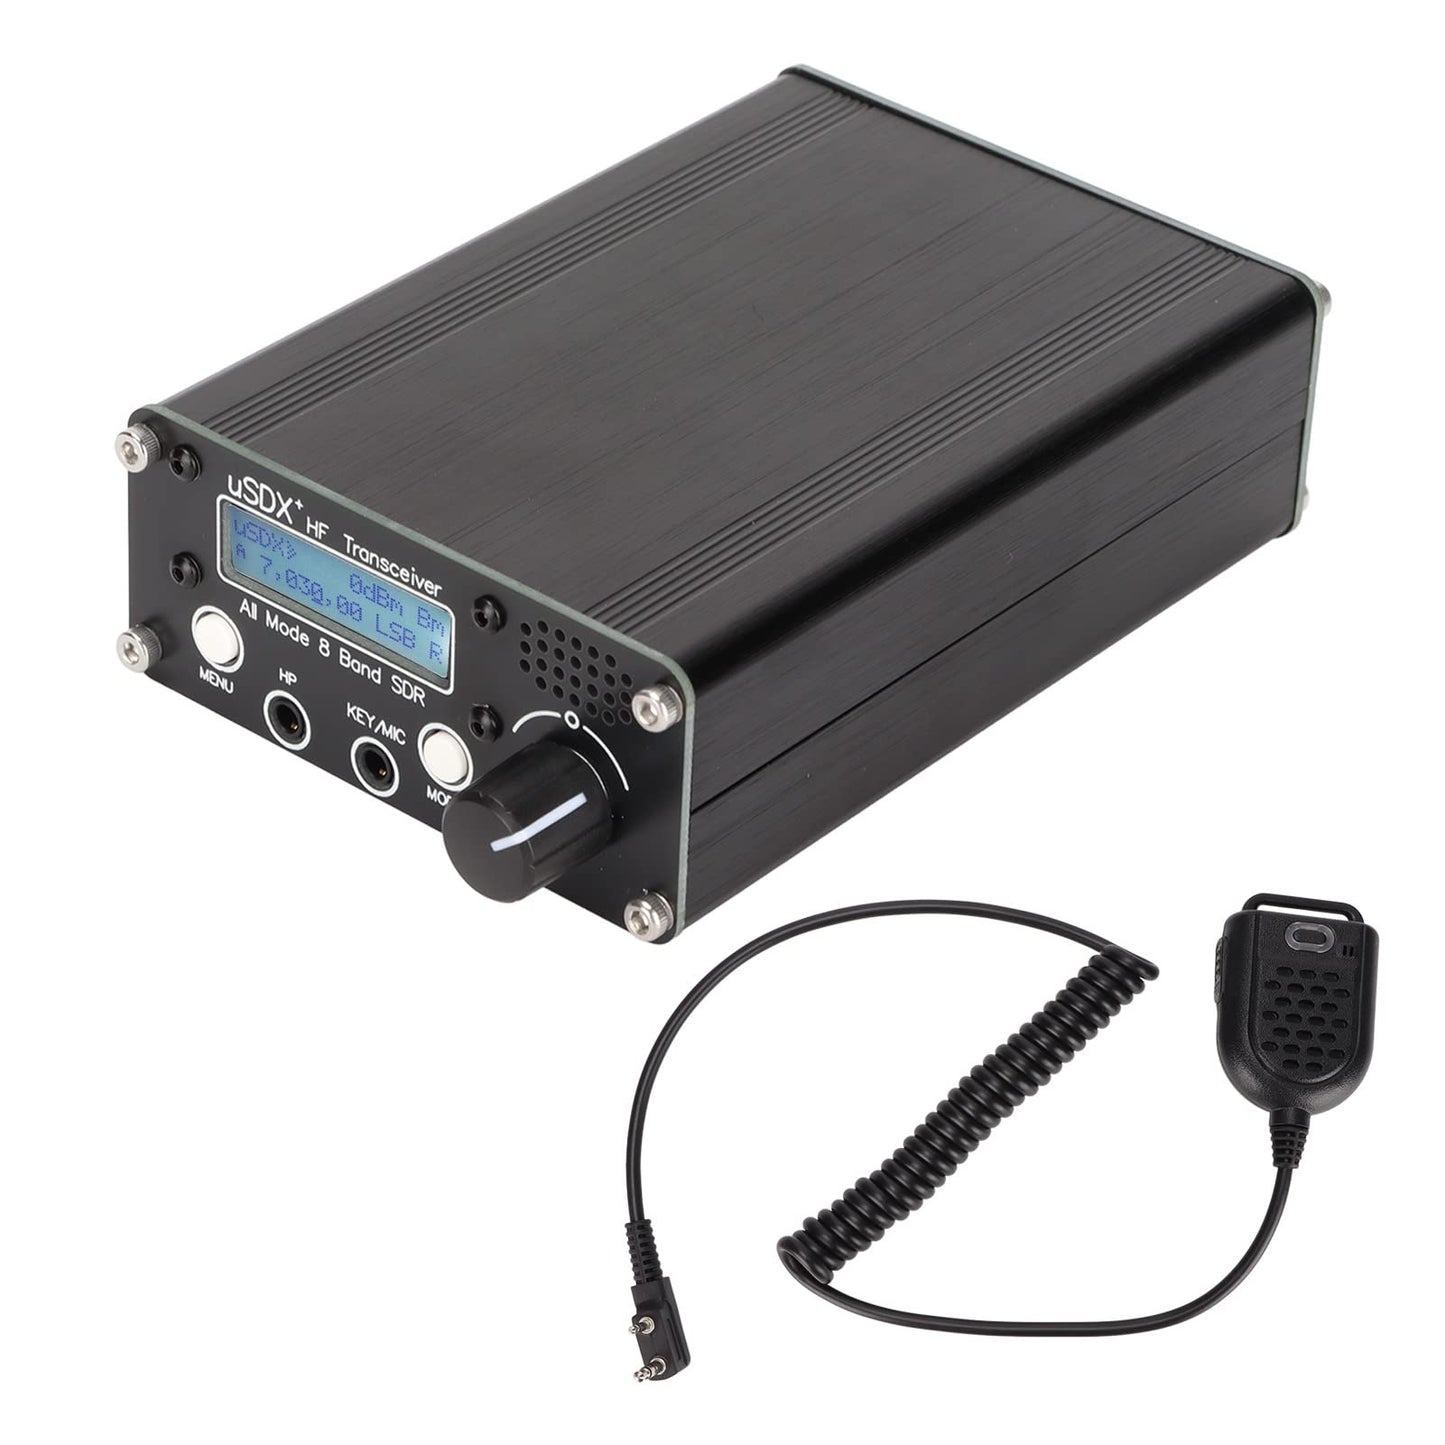 USDX Transceiver Built in Battery All Mode 8 Band HF Ham Radio QRP CW Transceiver